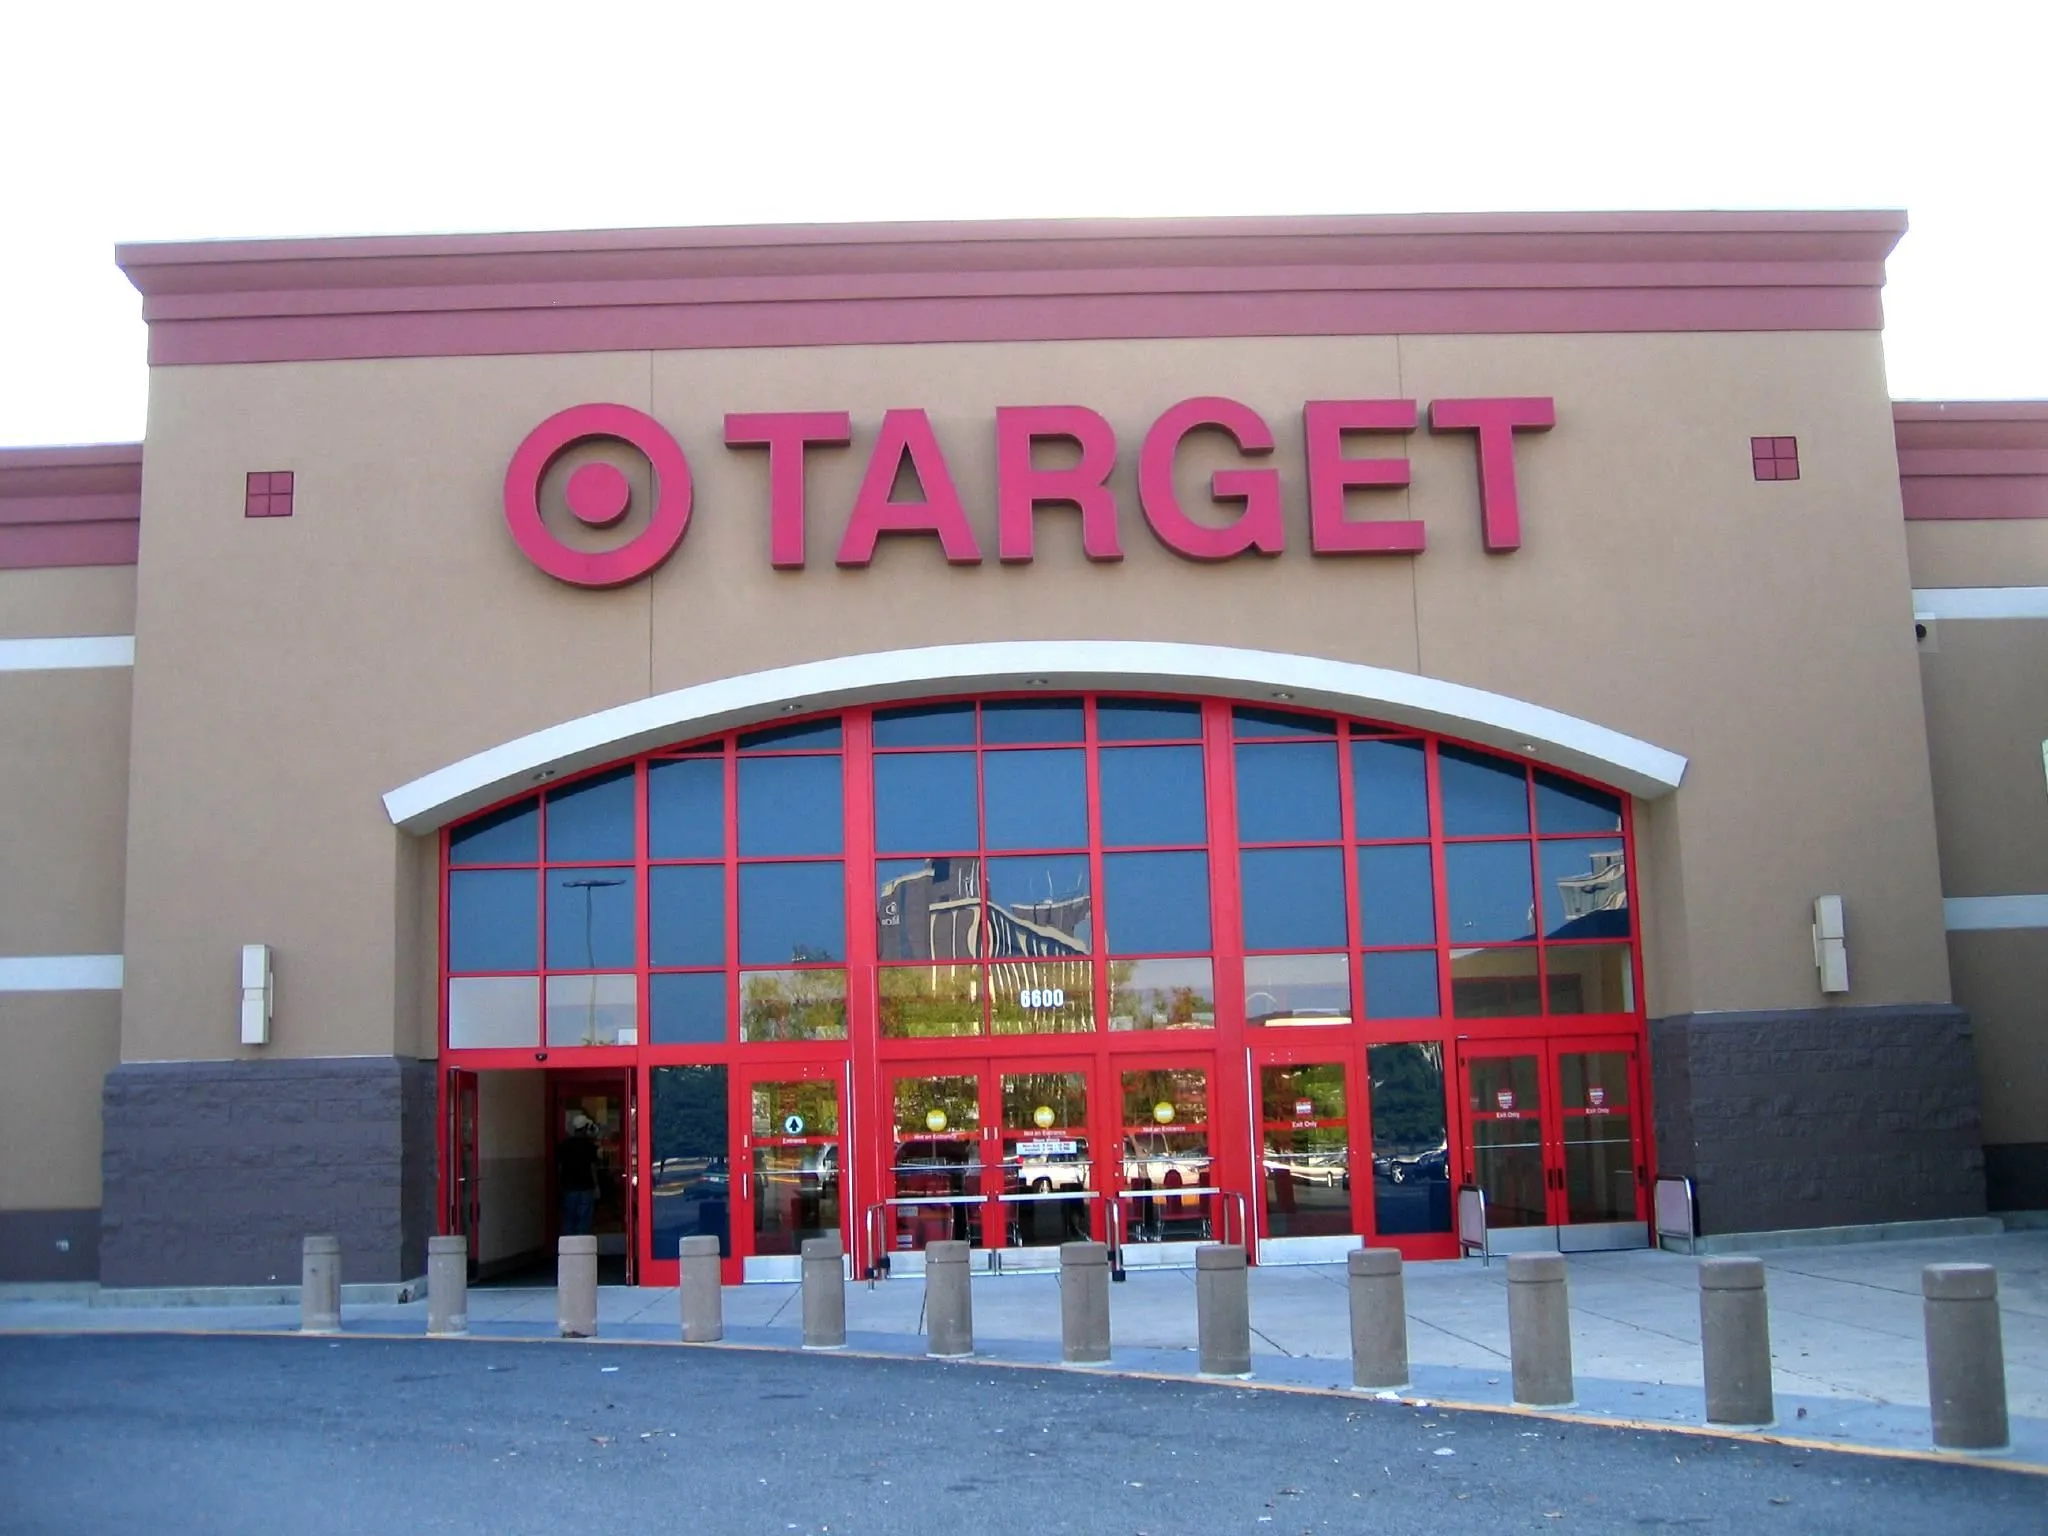 Retail Giant Target Will Be Closing 11 Stores By February 2015 ...